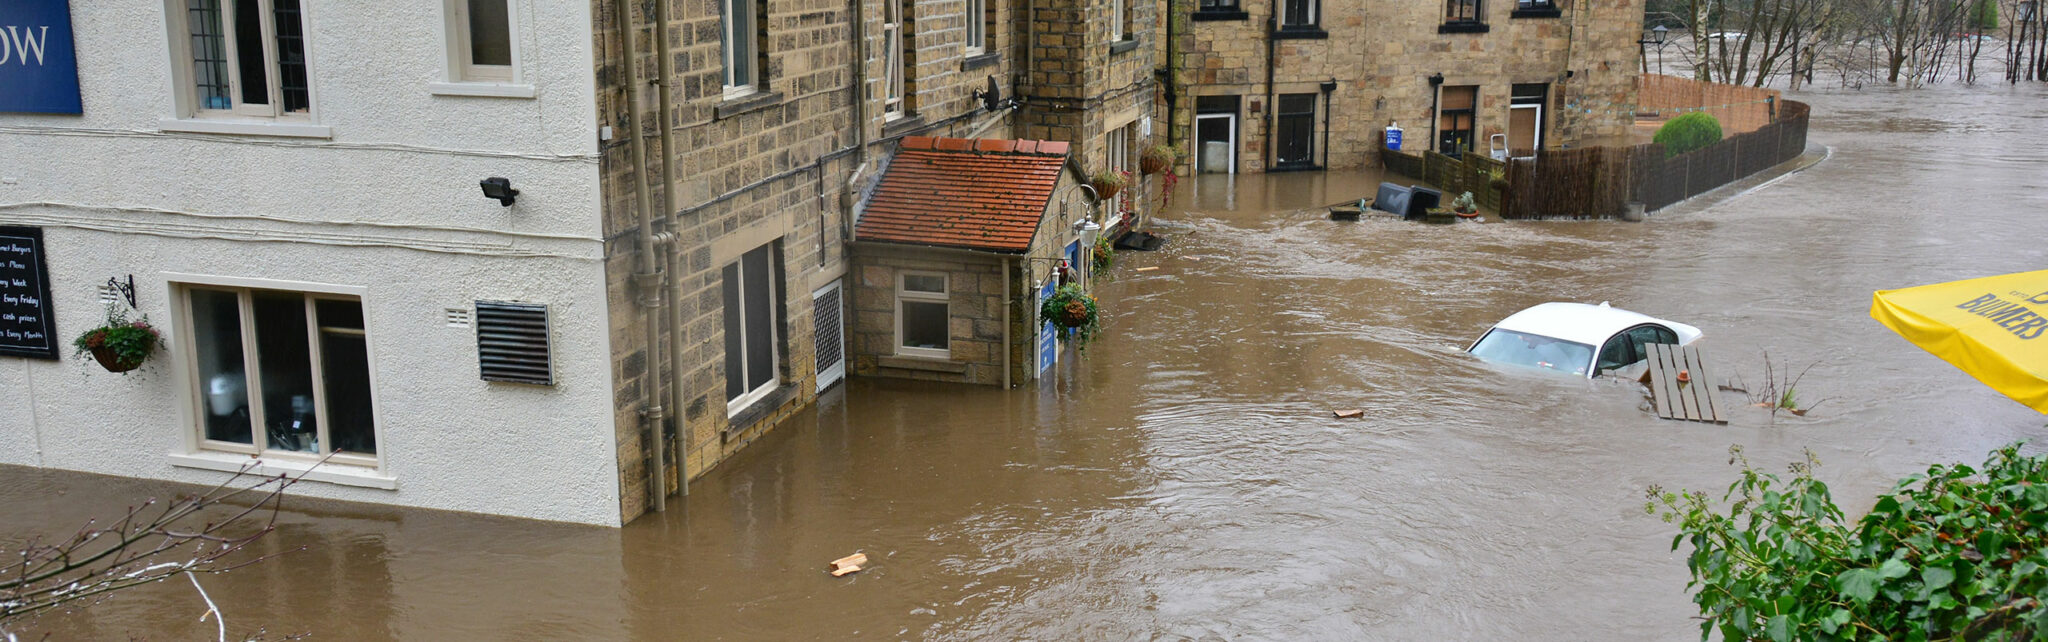 Ease the Pain of Flooding - Atom Insurance